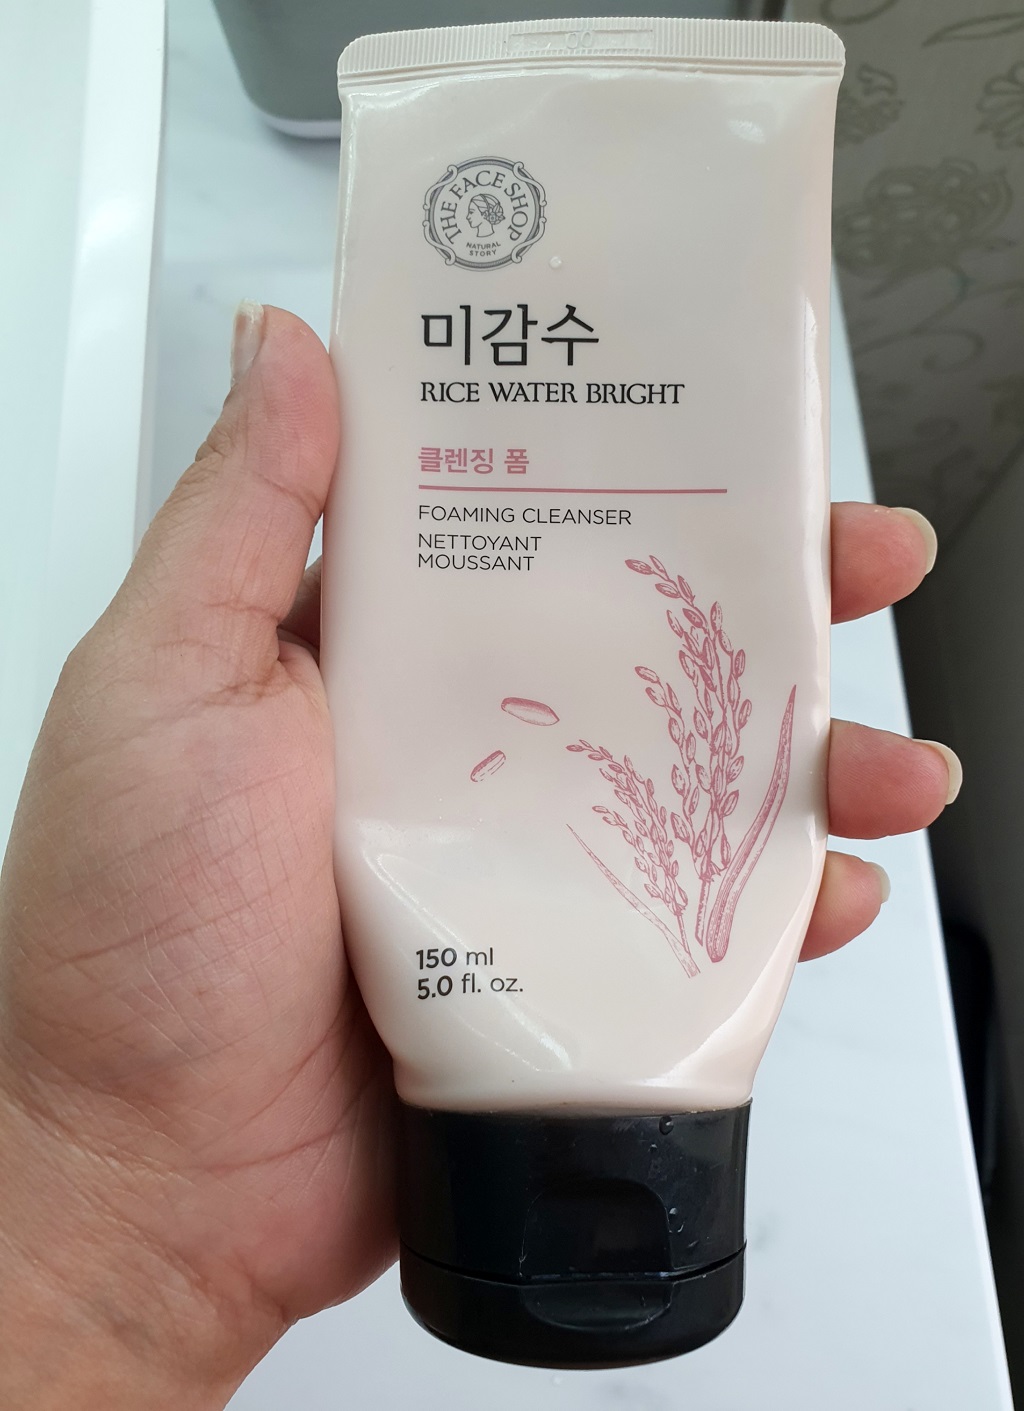 The Face Shop Rice Water Bright Foaming Cleanser